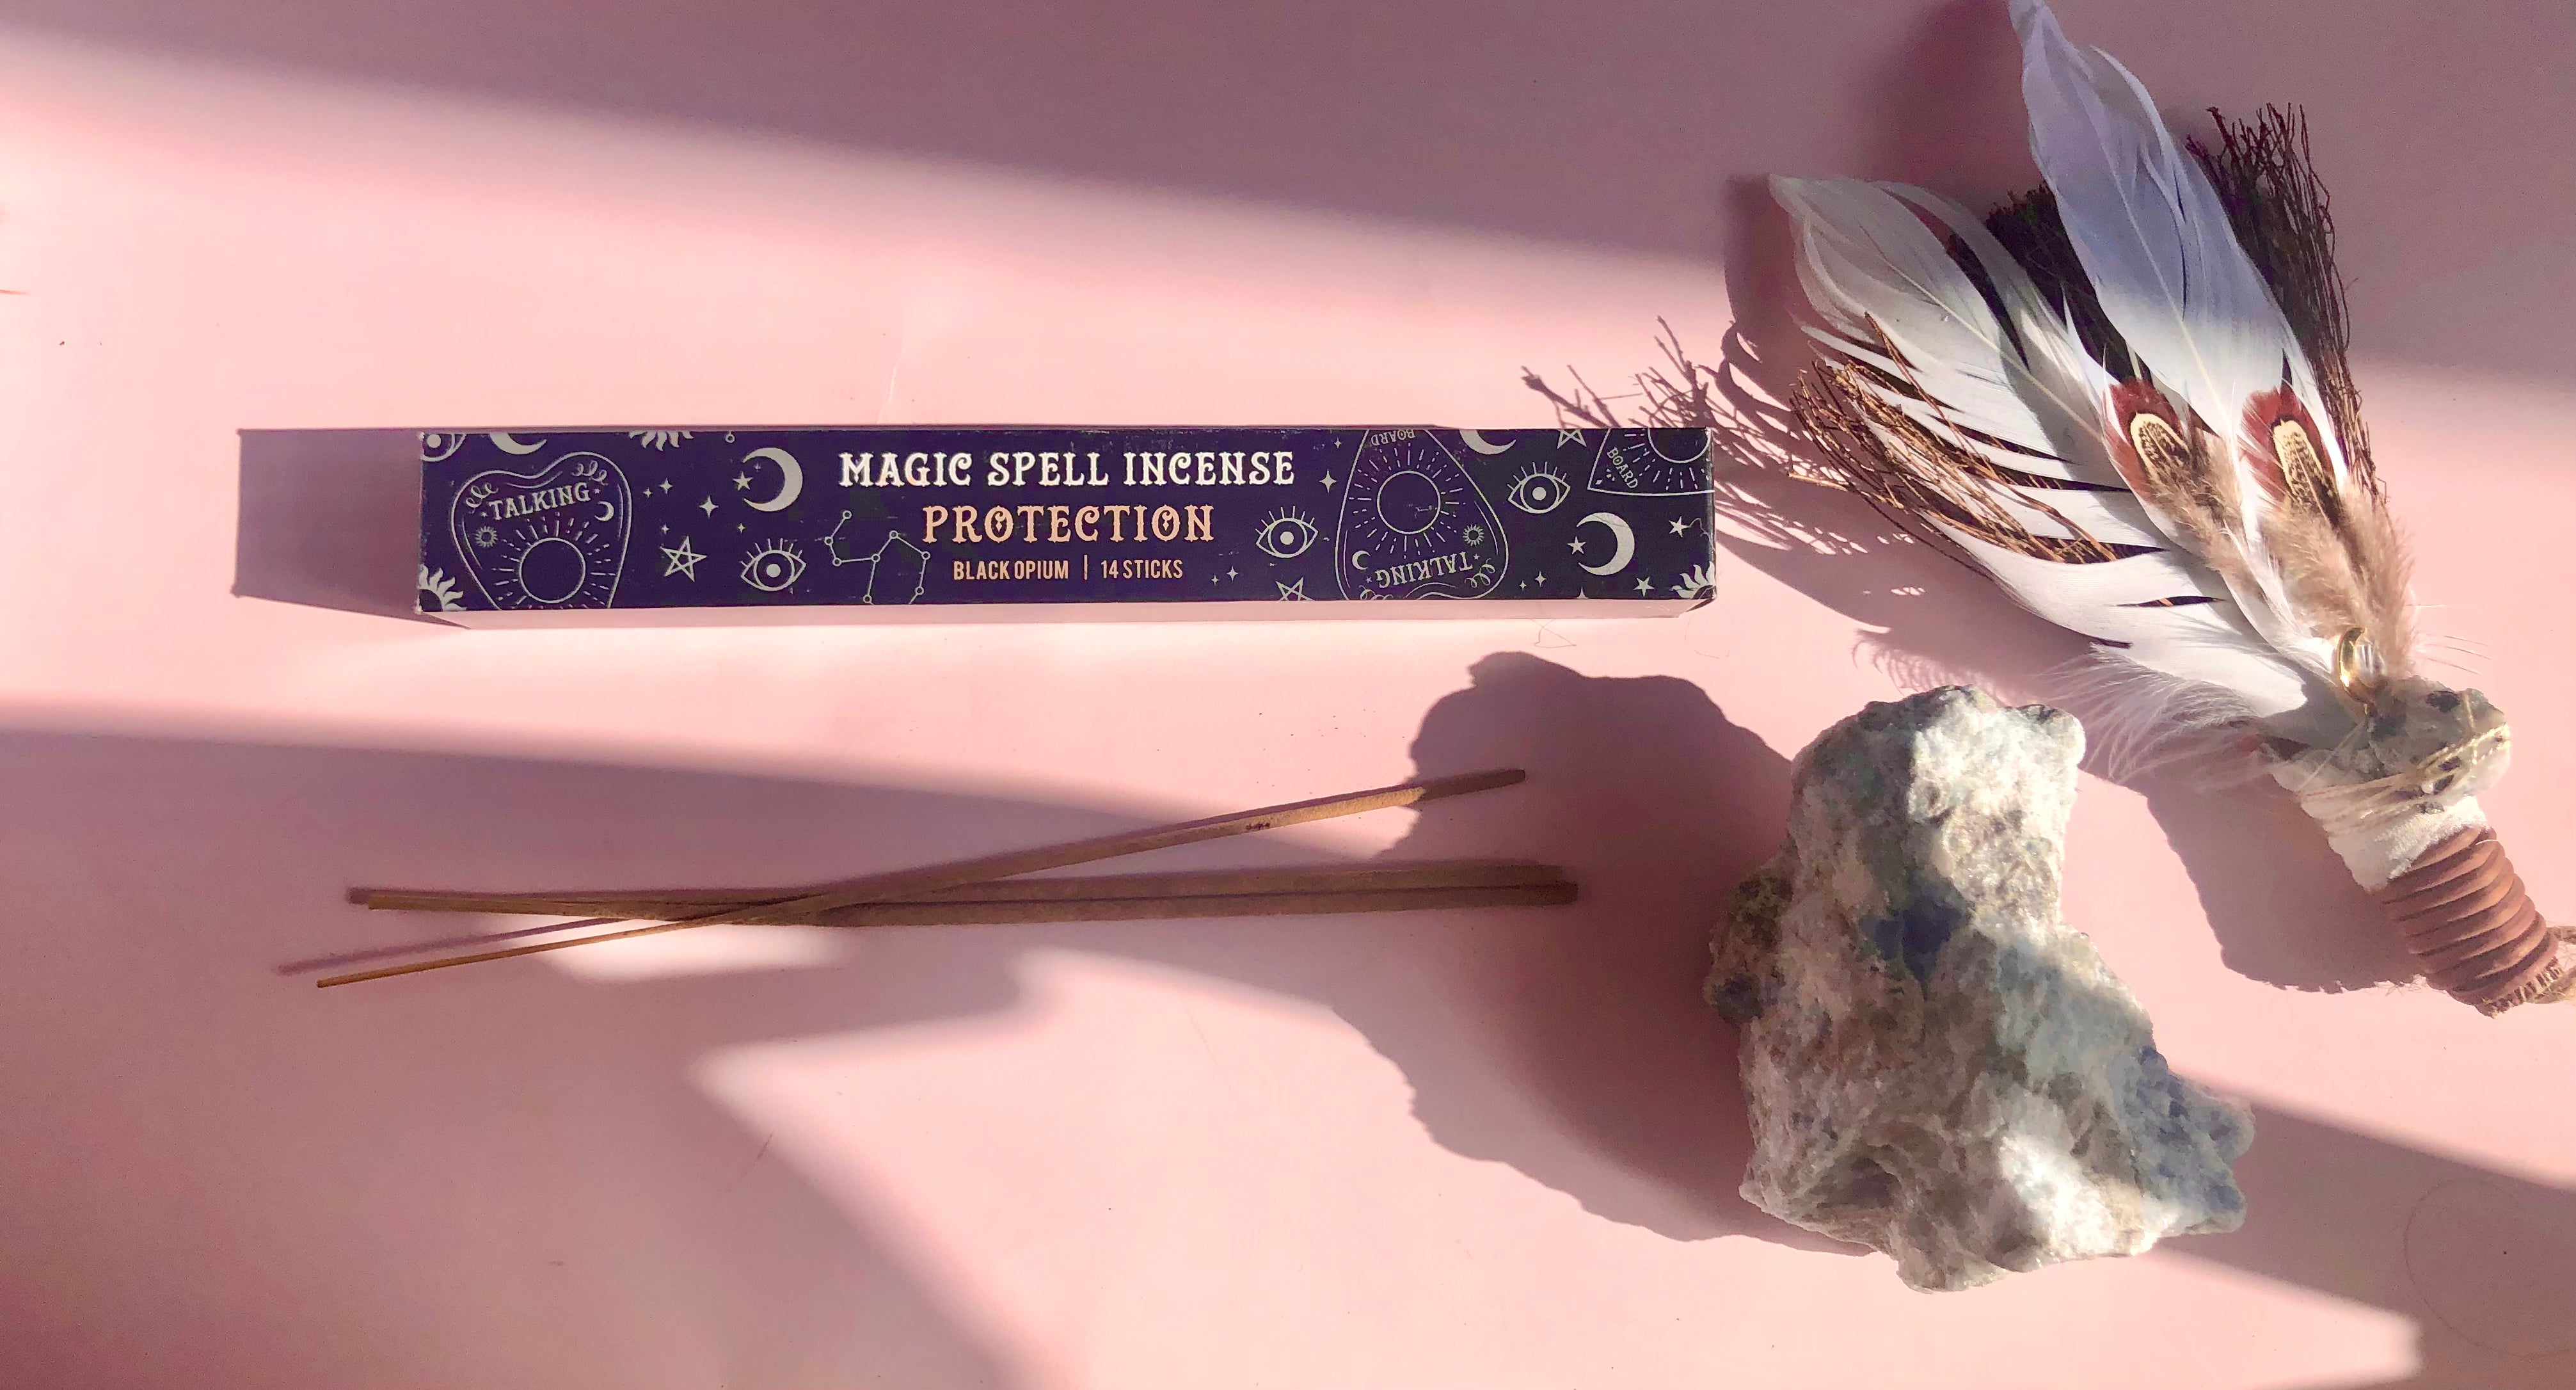 Protection ☾ “Magic Spell” Røgelses Pinde  ☾ Sort Opium